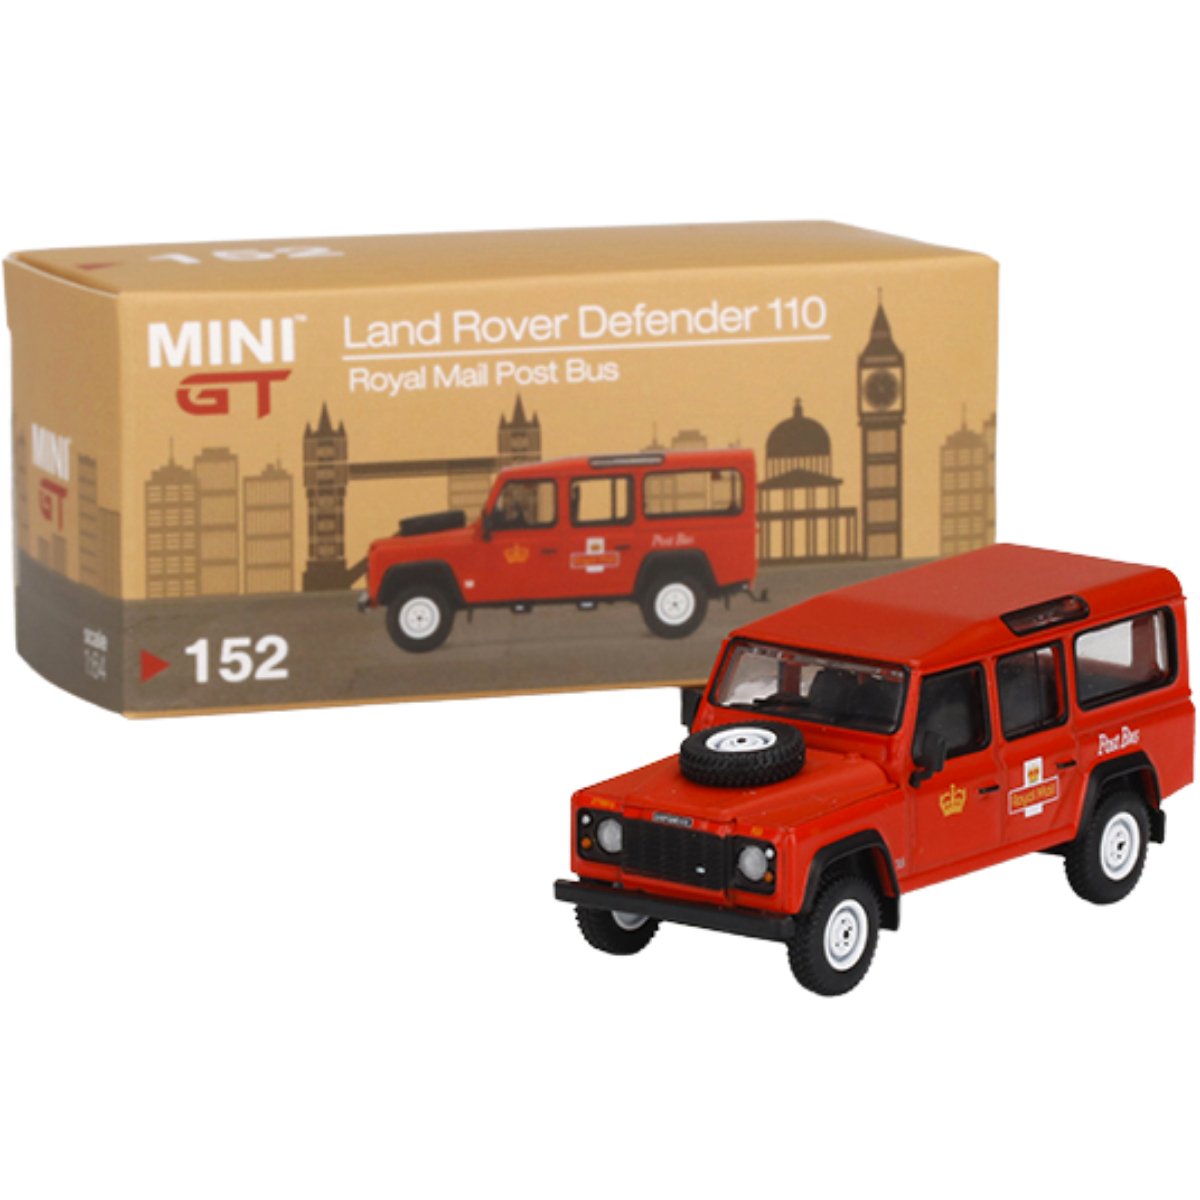 Mini GT Land Rover Defender 110 UK Royal Mail Post Bus (1:64 Scale)